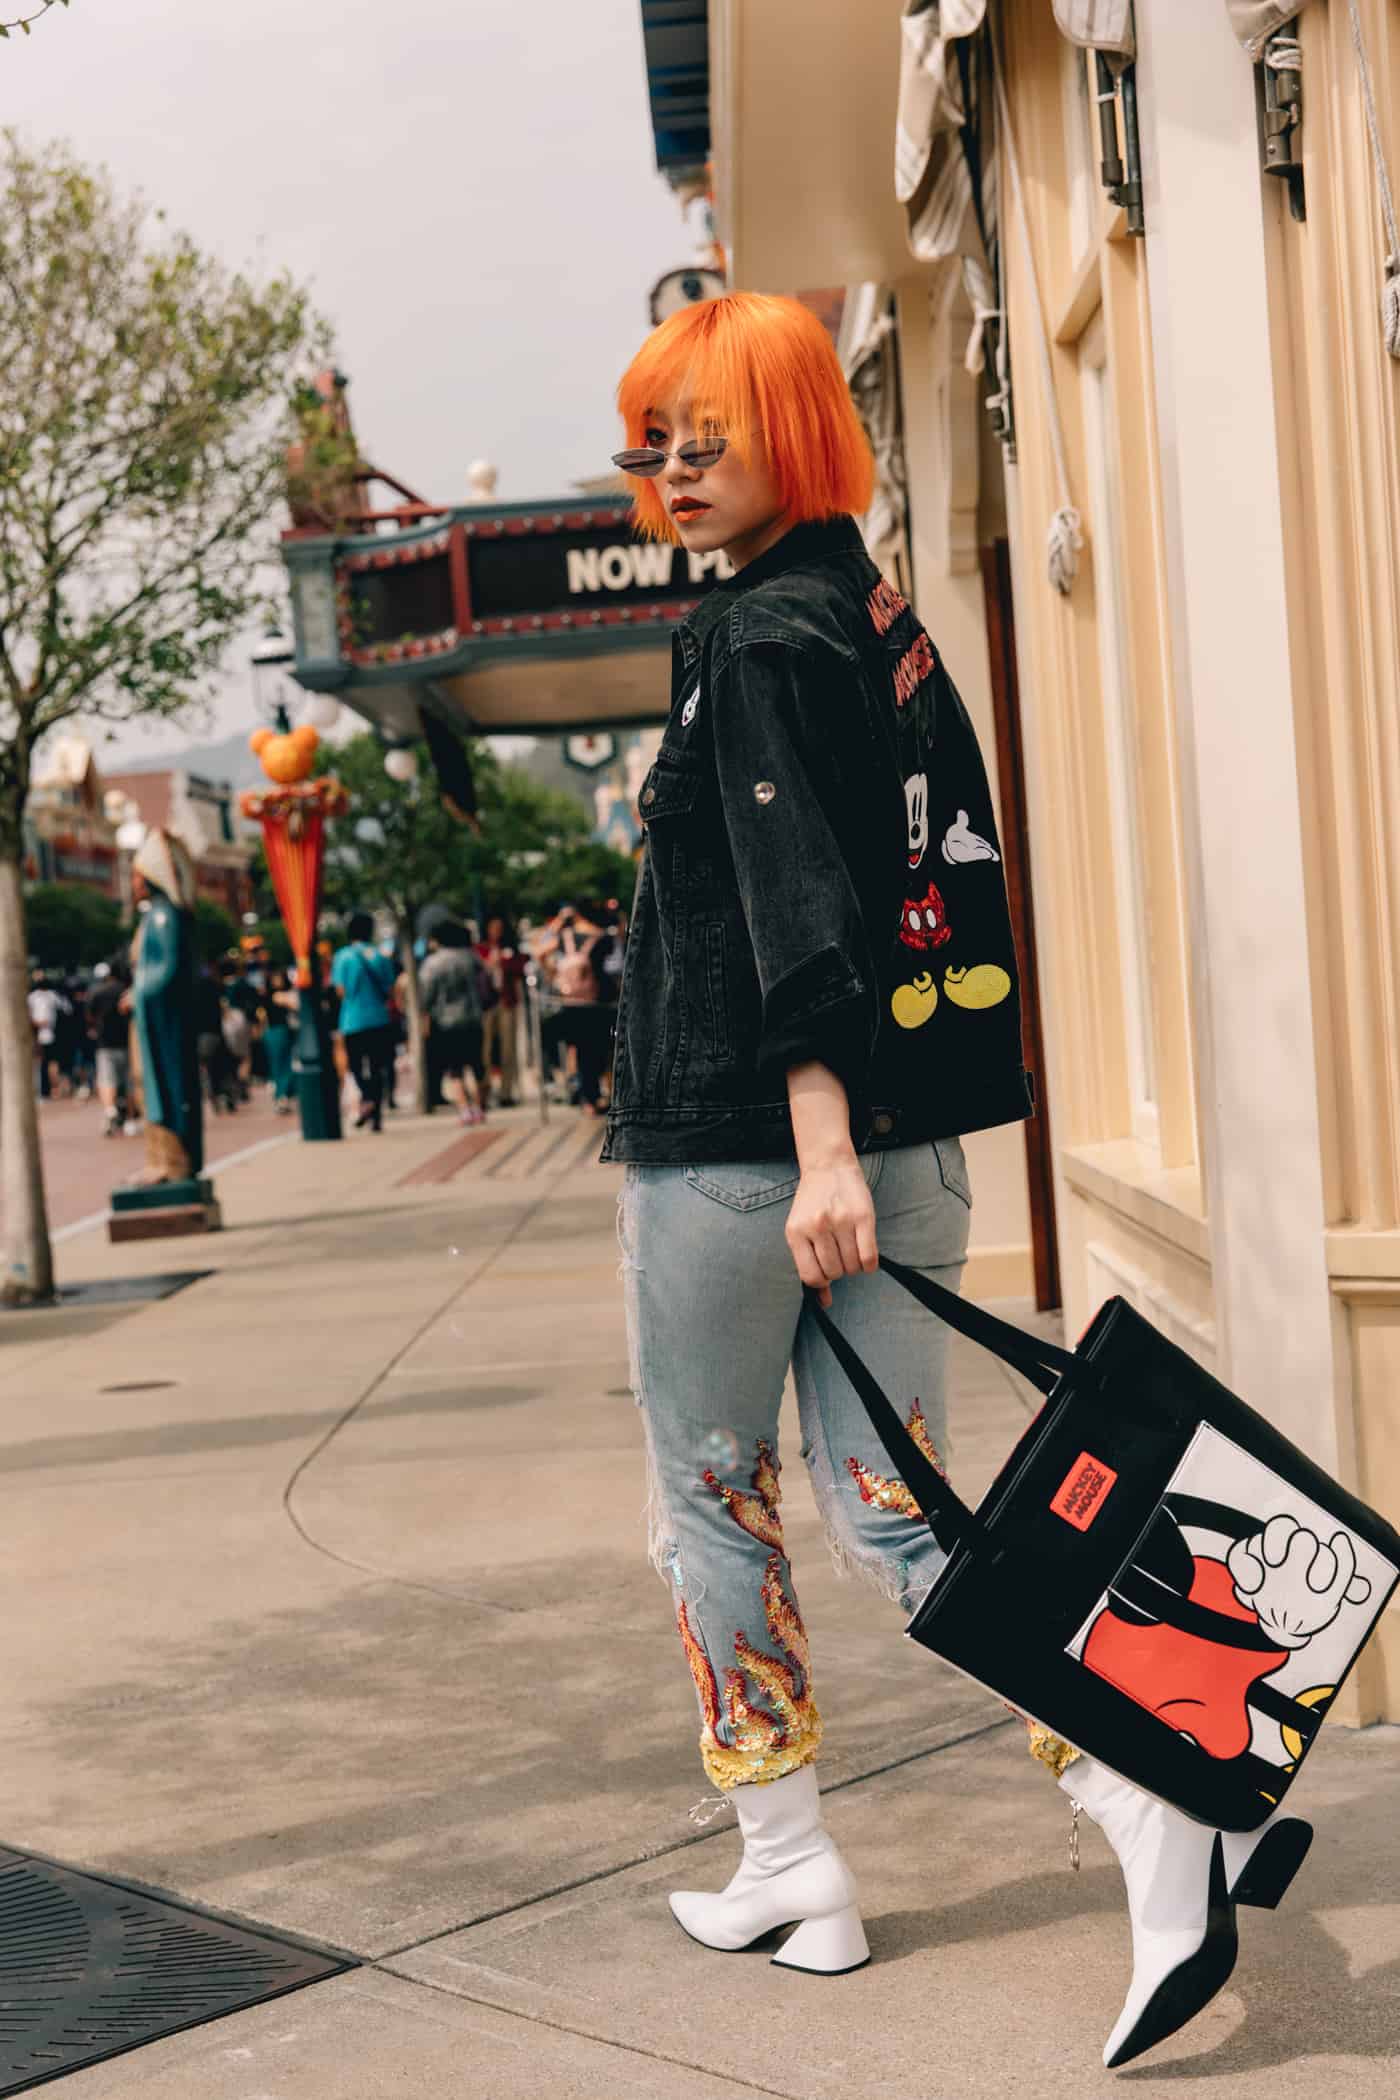 These Disney Street Style Pics From Around the World Are OOTD Goals